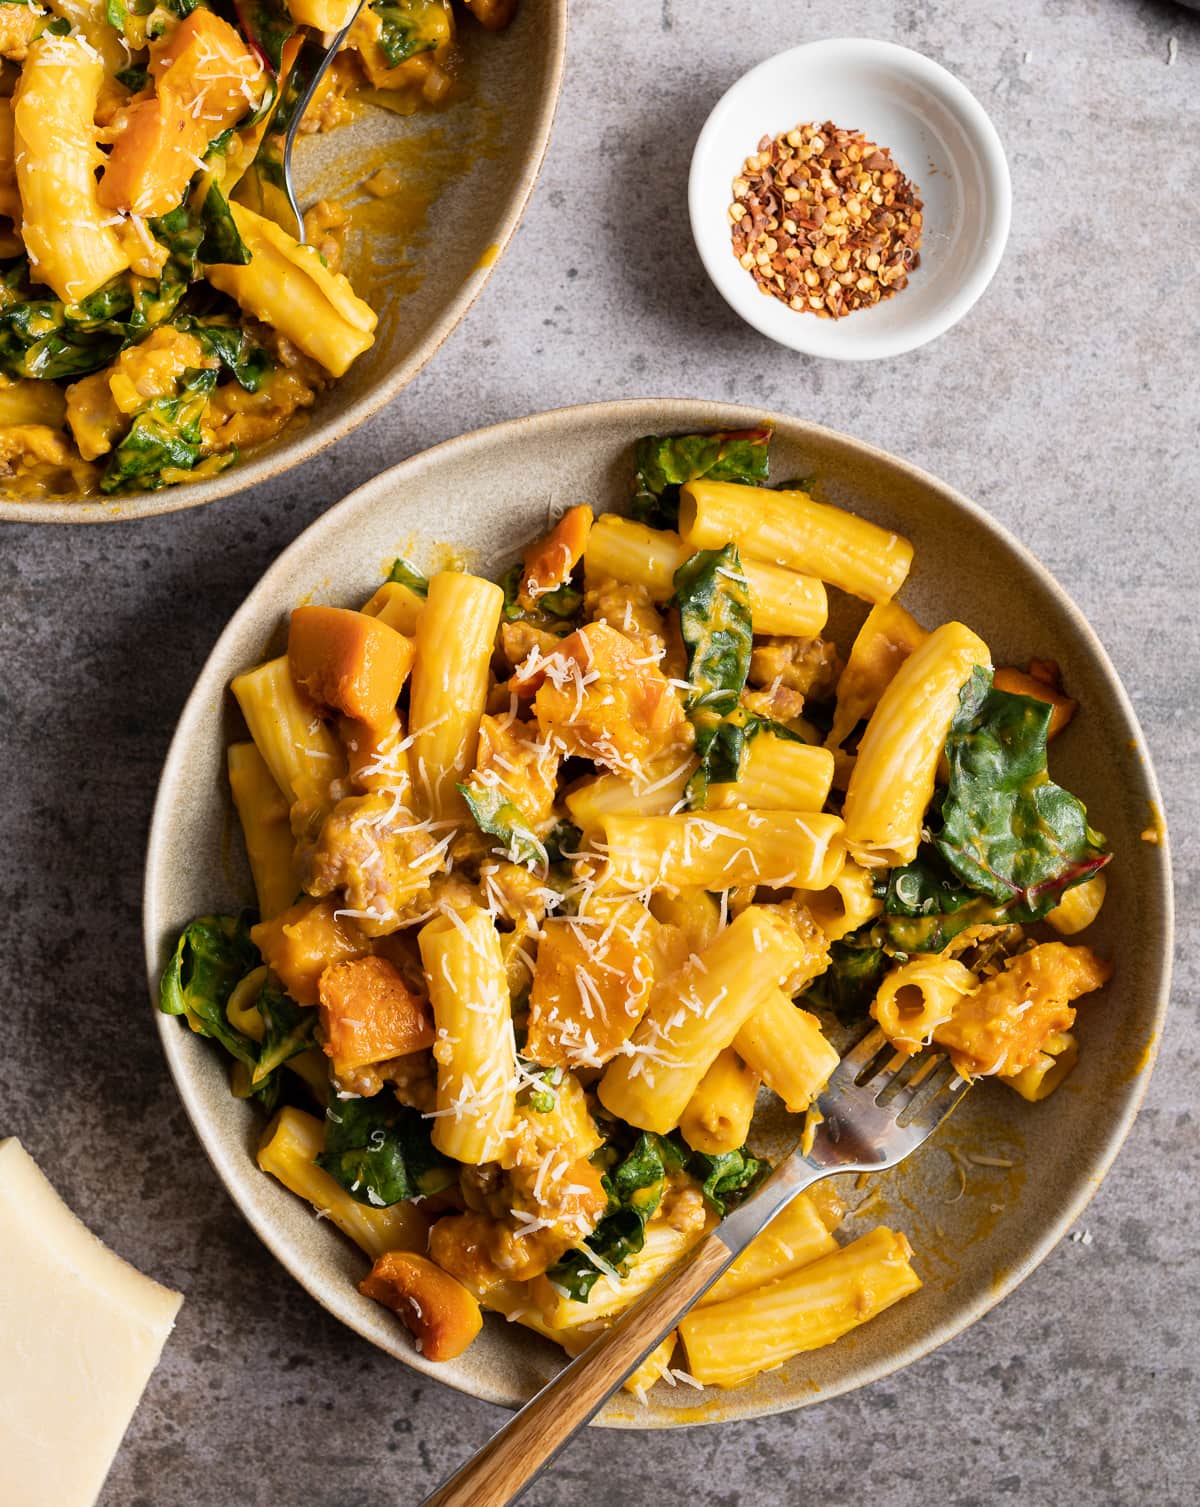 Beige bowl with orange yellow honeynut squash pasta green chard bowl or red pepper flakes fork